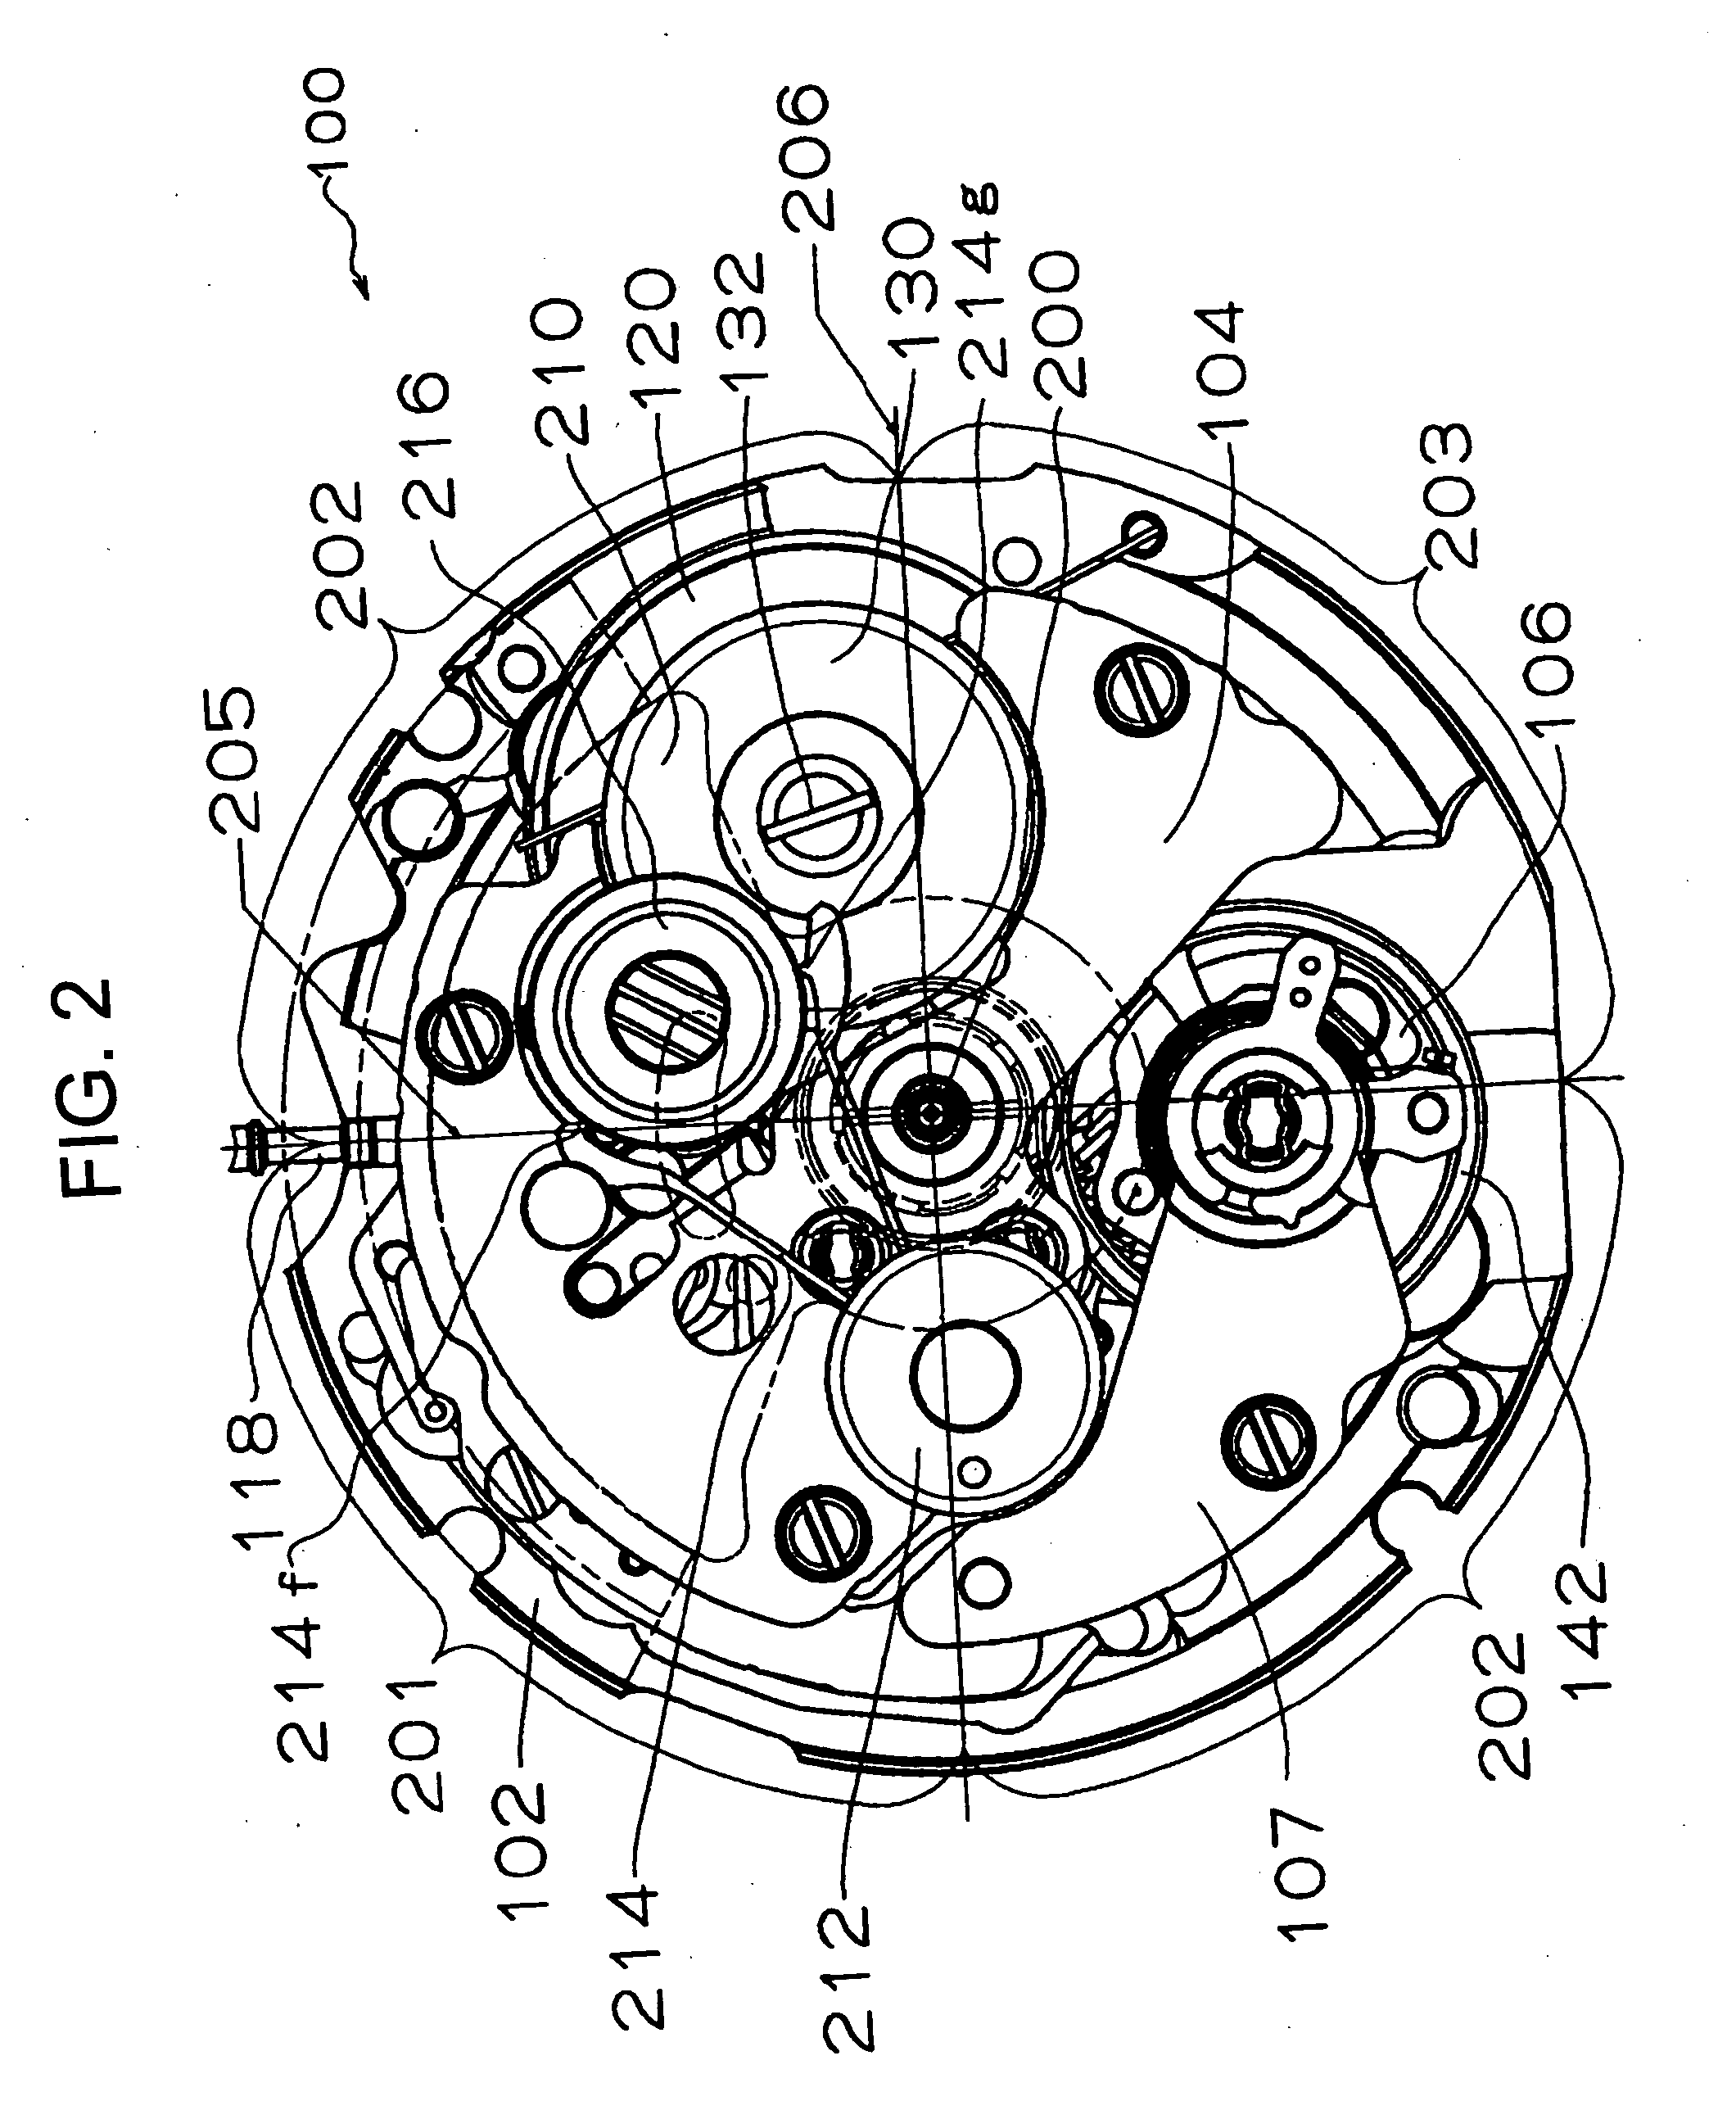 Timepiece having mainspring winding state display apparatus including deformed segment gear